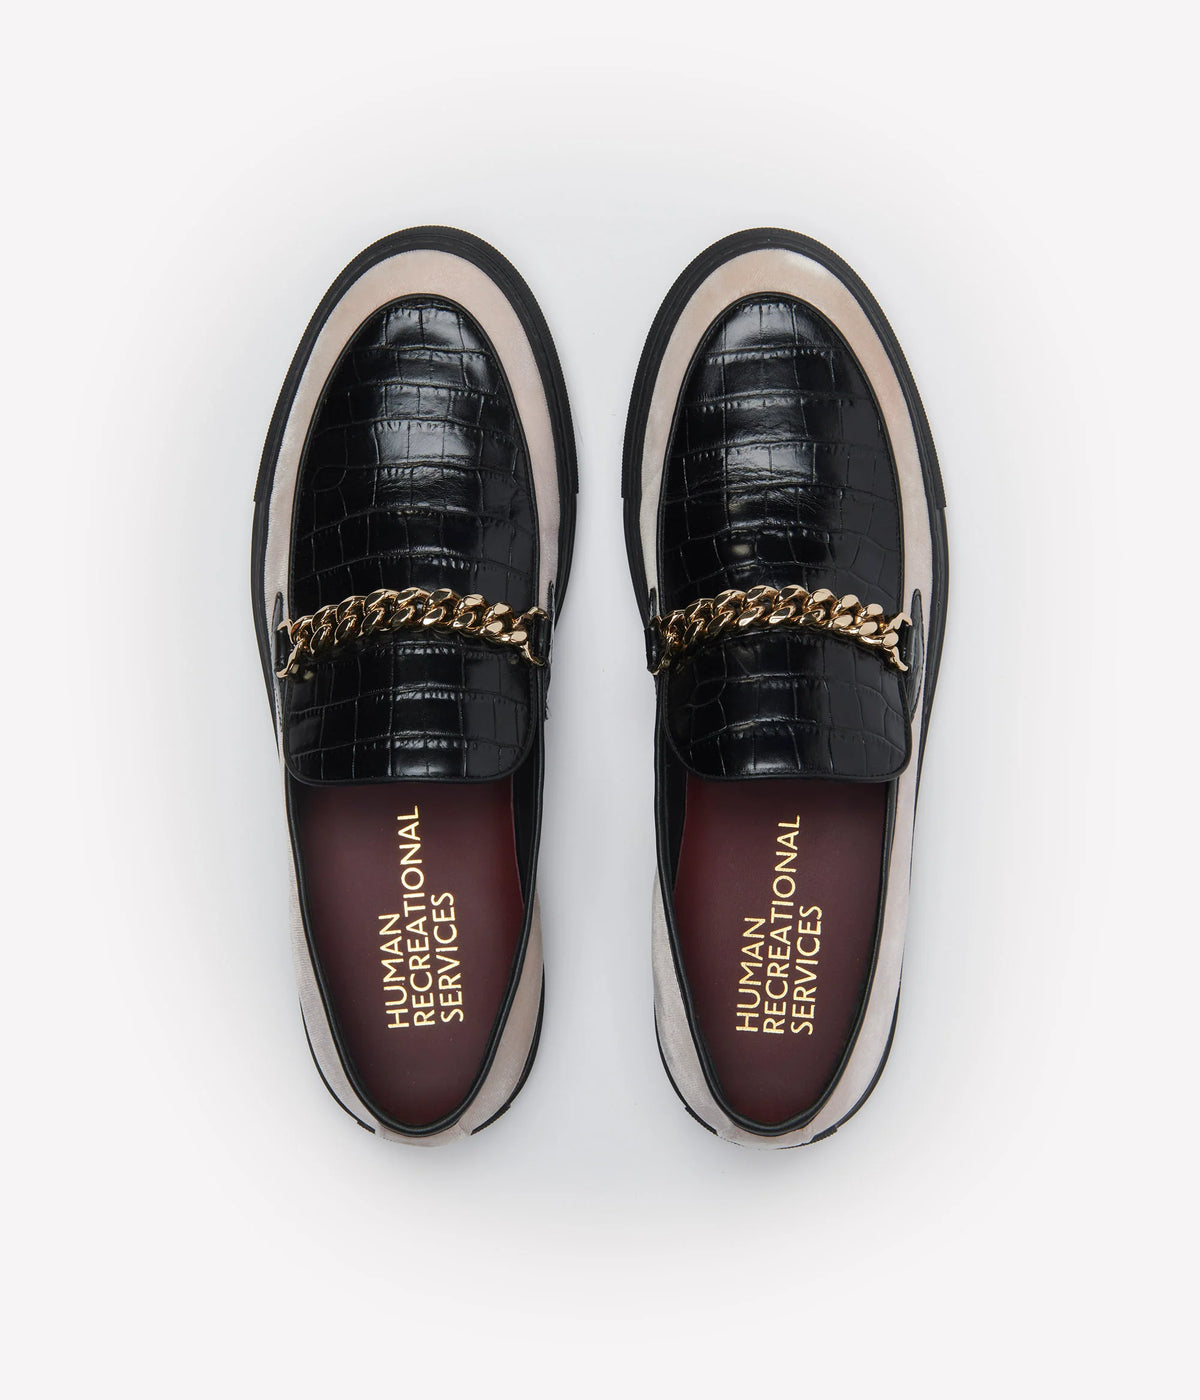 HUMAN RECREATIONAL SERVICES LOAFER WITH LIGHT PINK VELVET AND BLACK LEATHER WITH ADDED GOLD CUBAN LINK CHAIN.